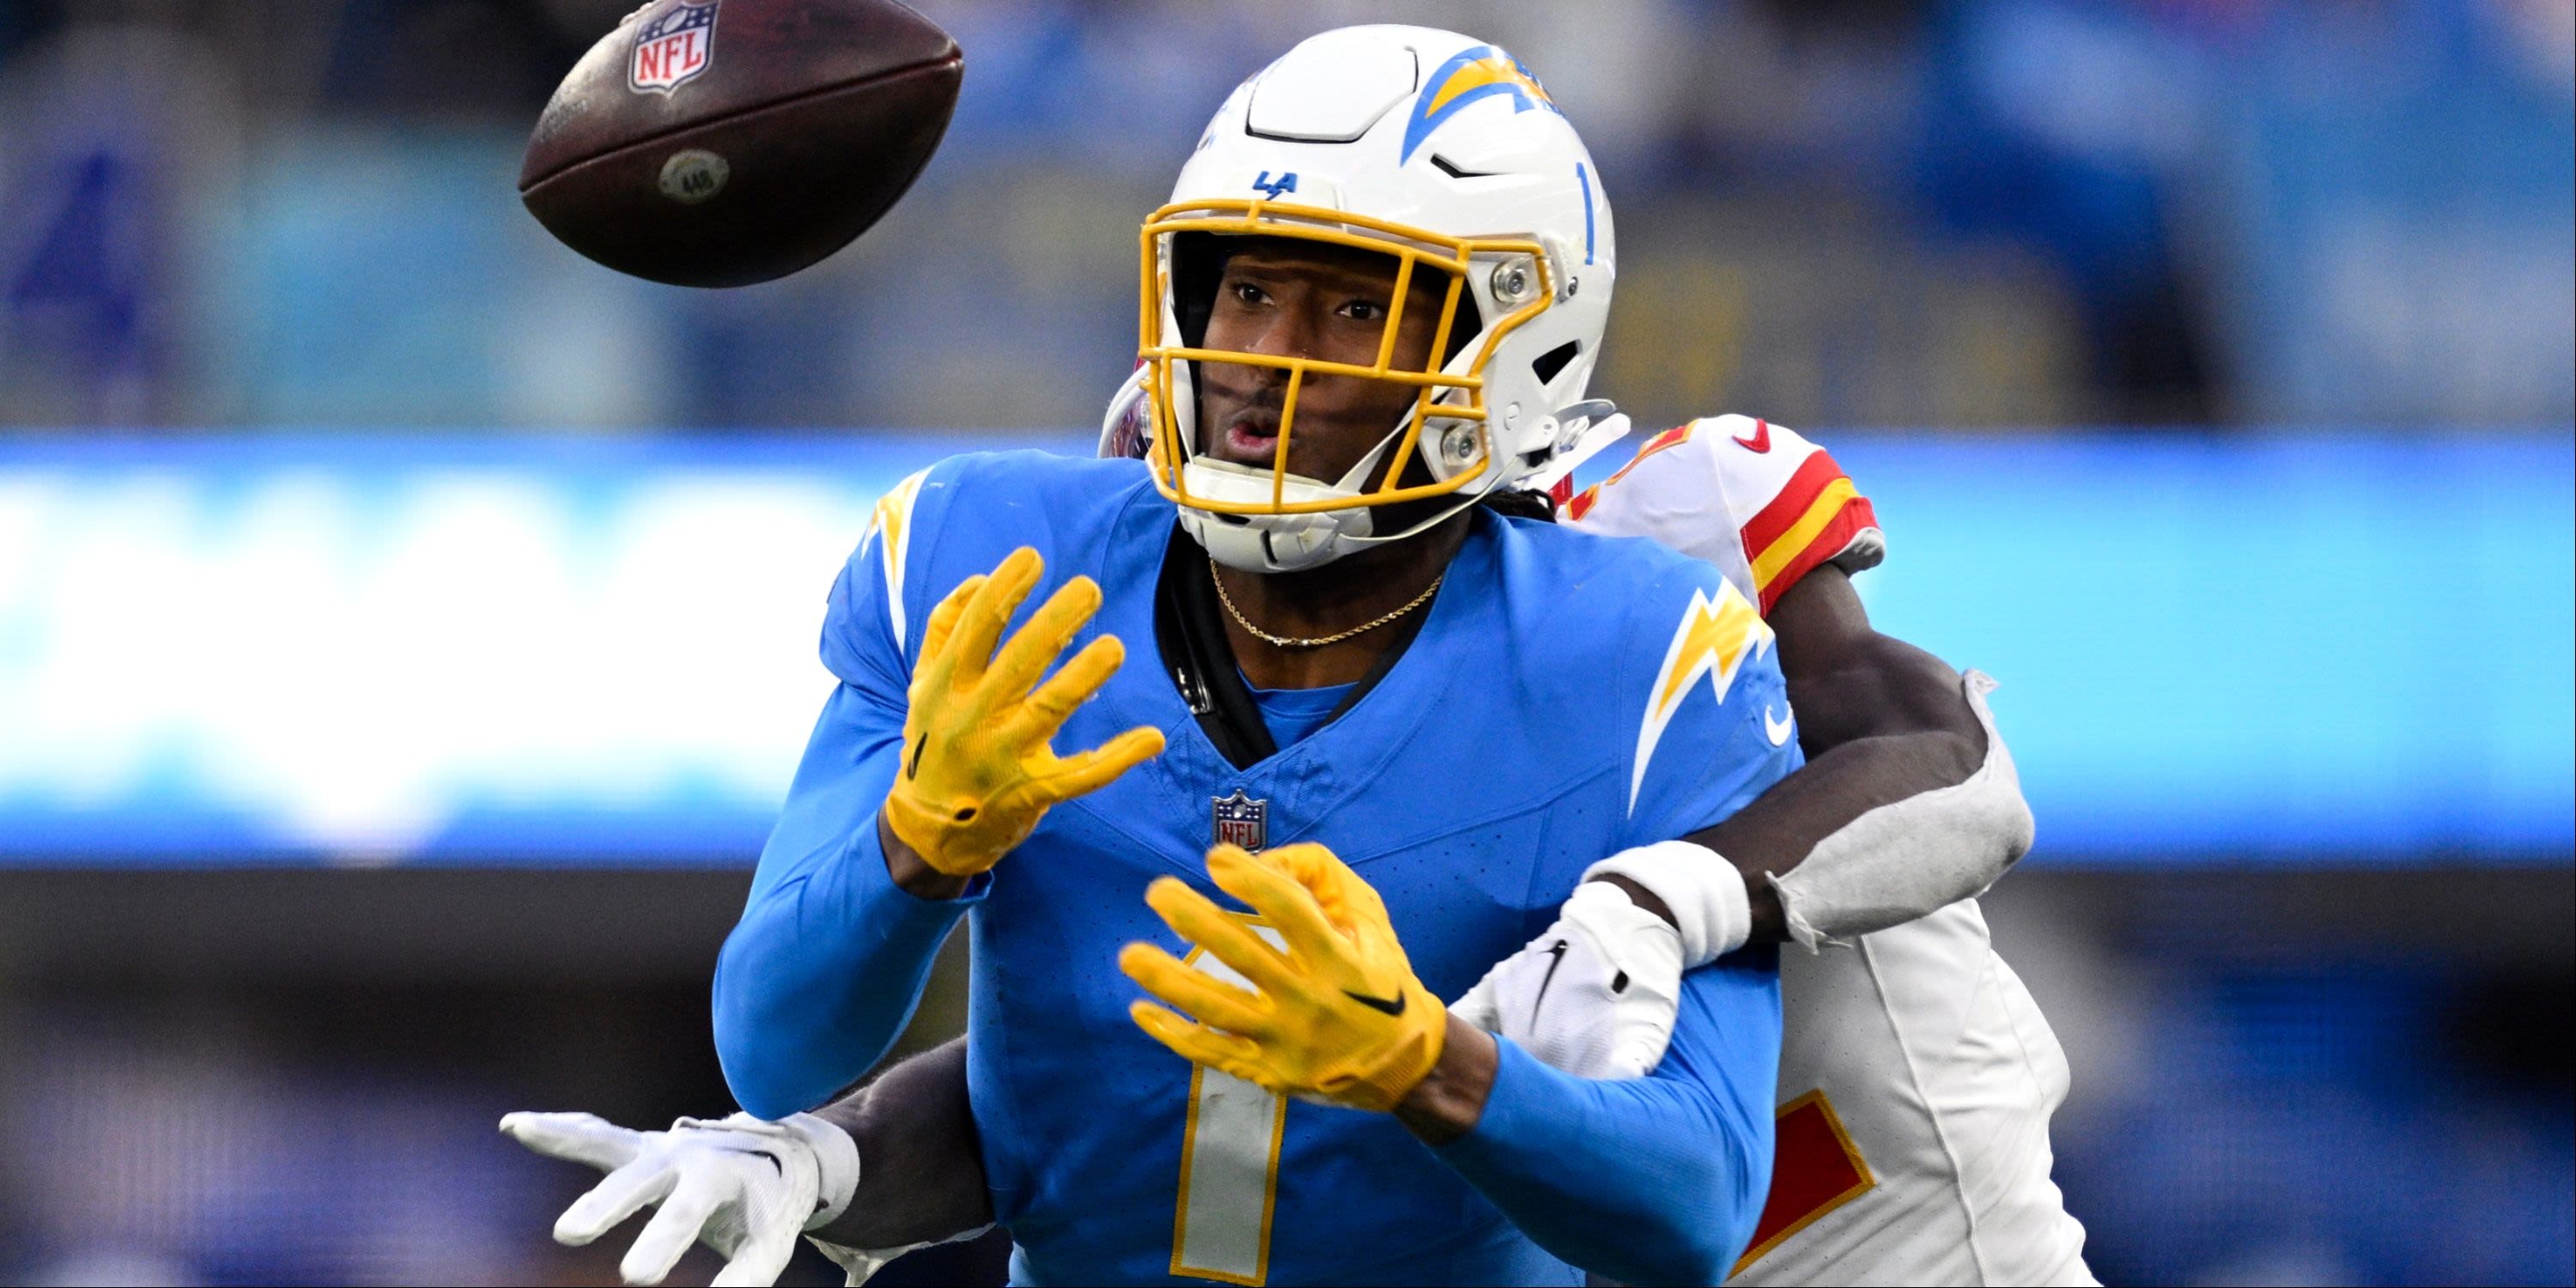 Chargers' Second-Year WR Labels Drops in Rookie Season 'Unacceptable'